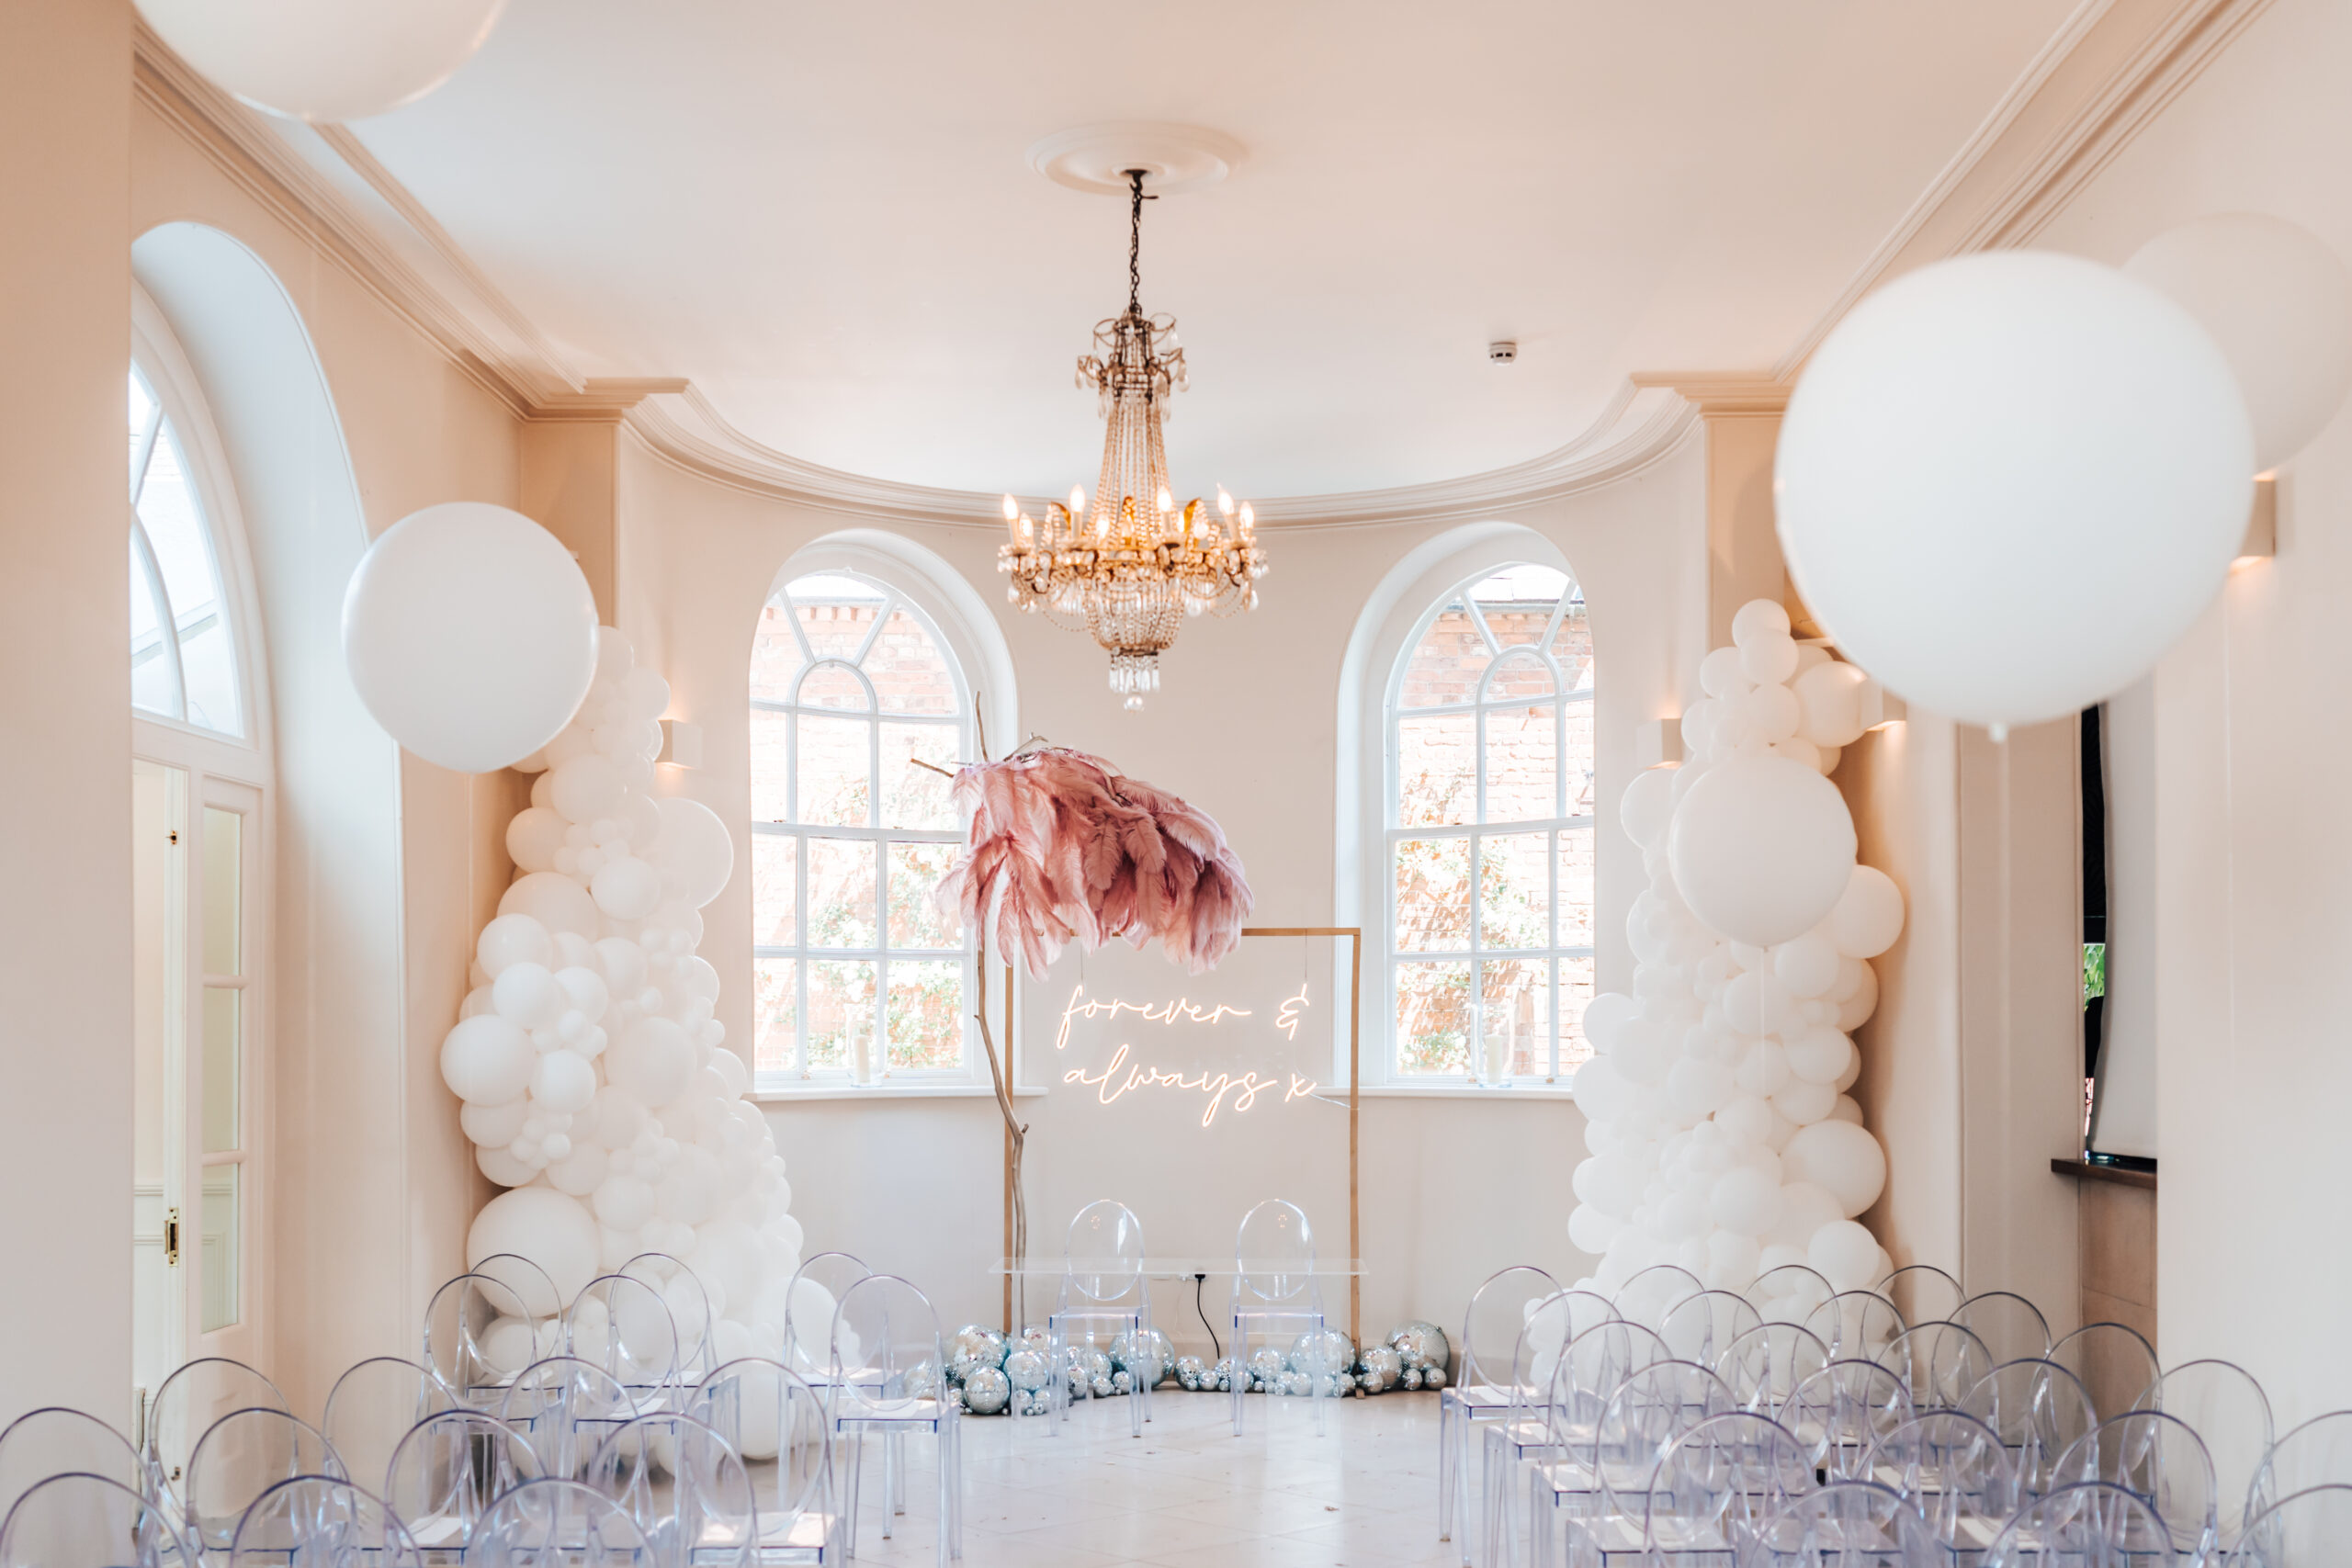 A wedding aisle altarpiece consisting of a neon sign saying forever and always flanked by an ostrich feather tree and hundreds of silver toned mirrorball and supersized white balloons